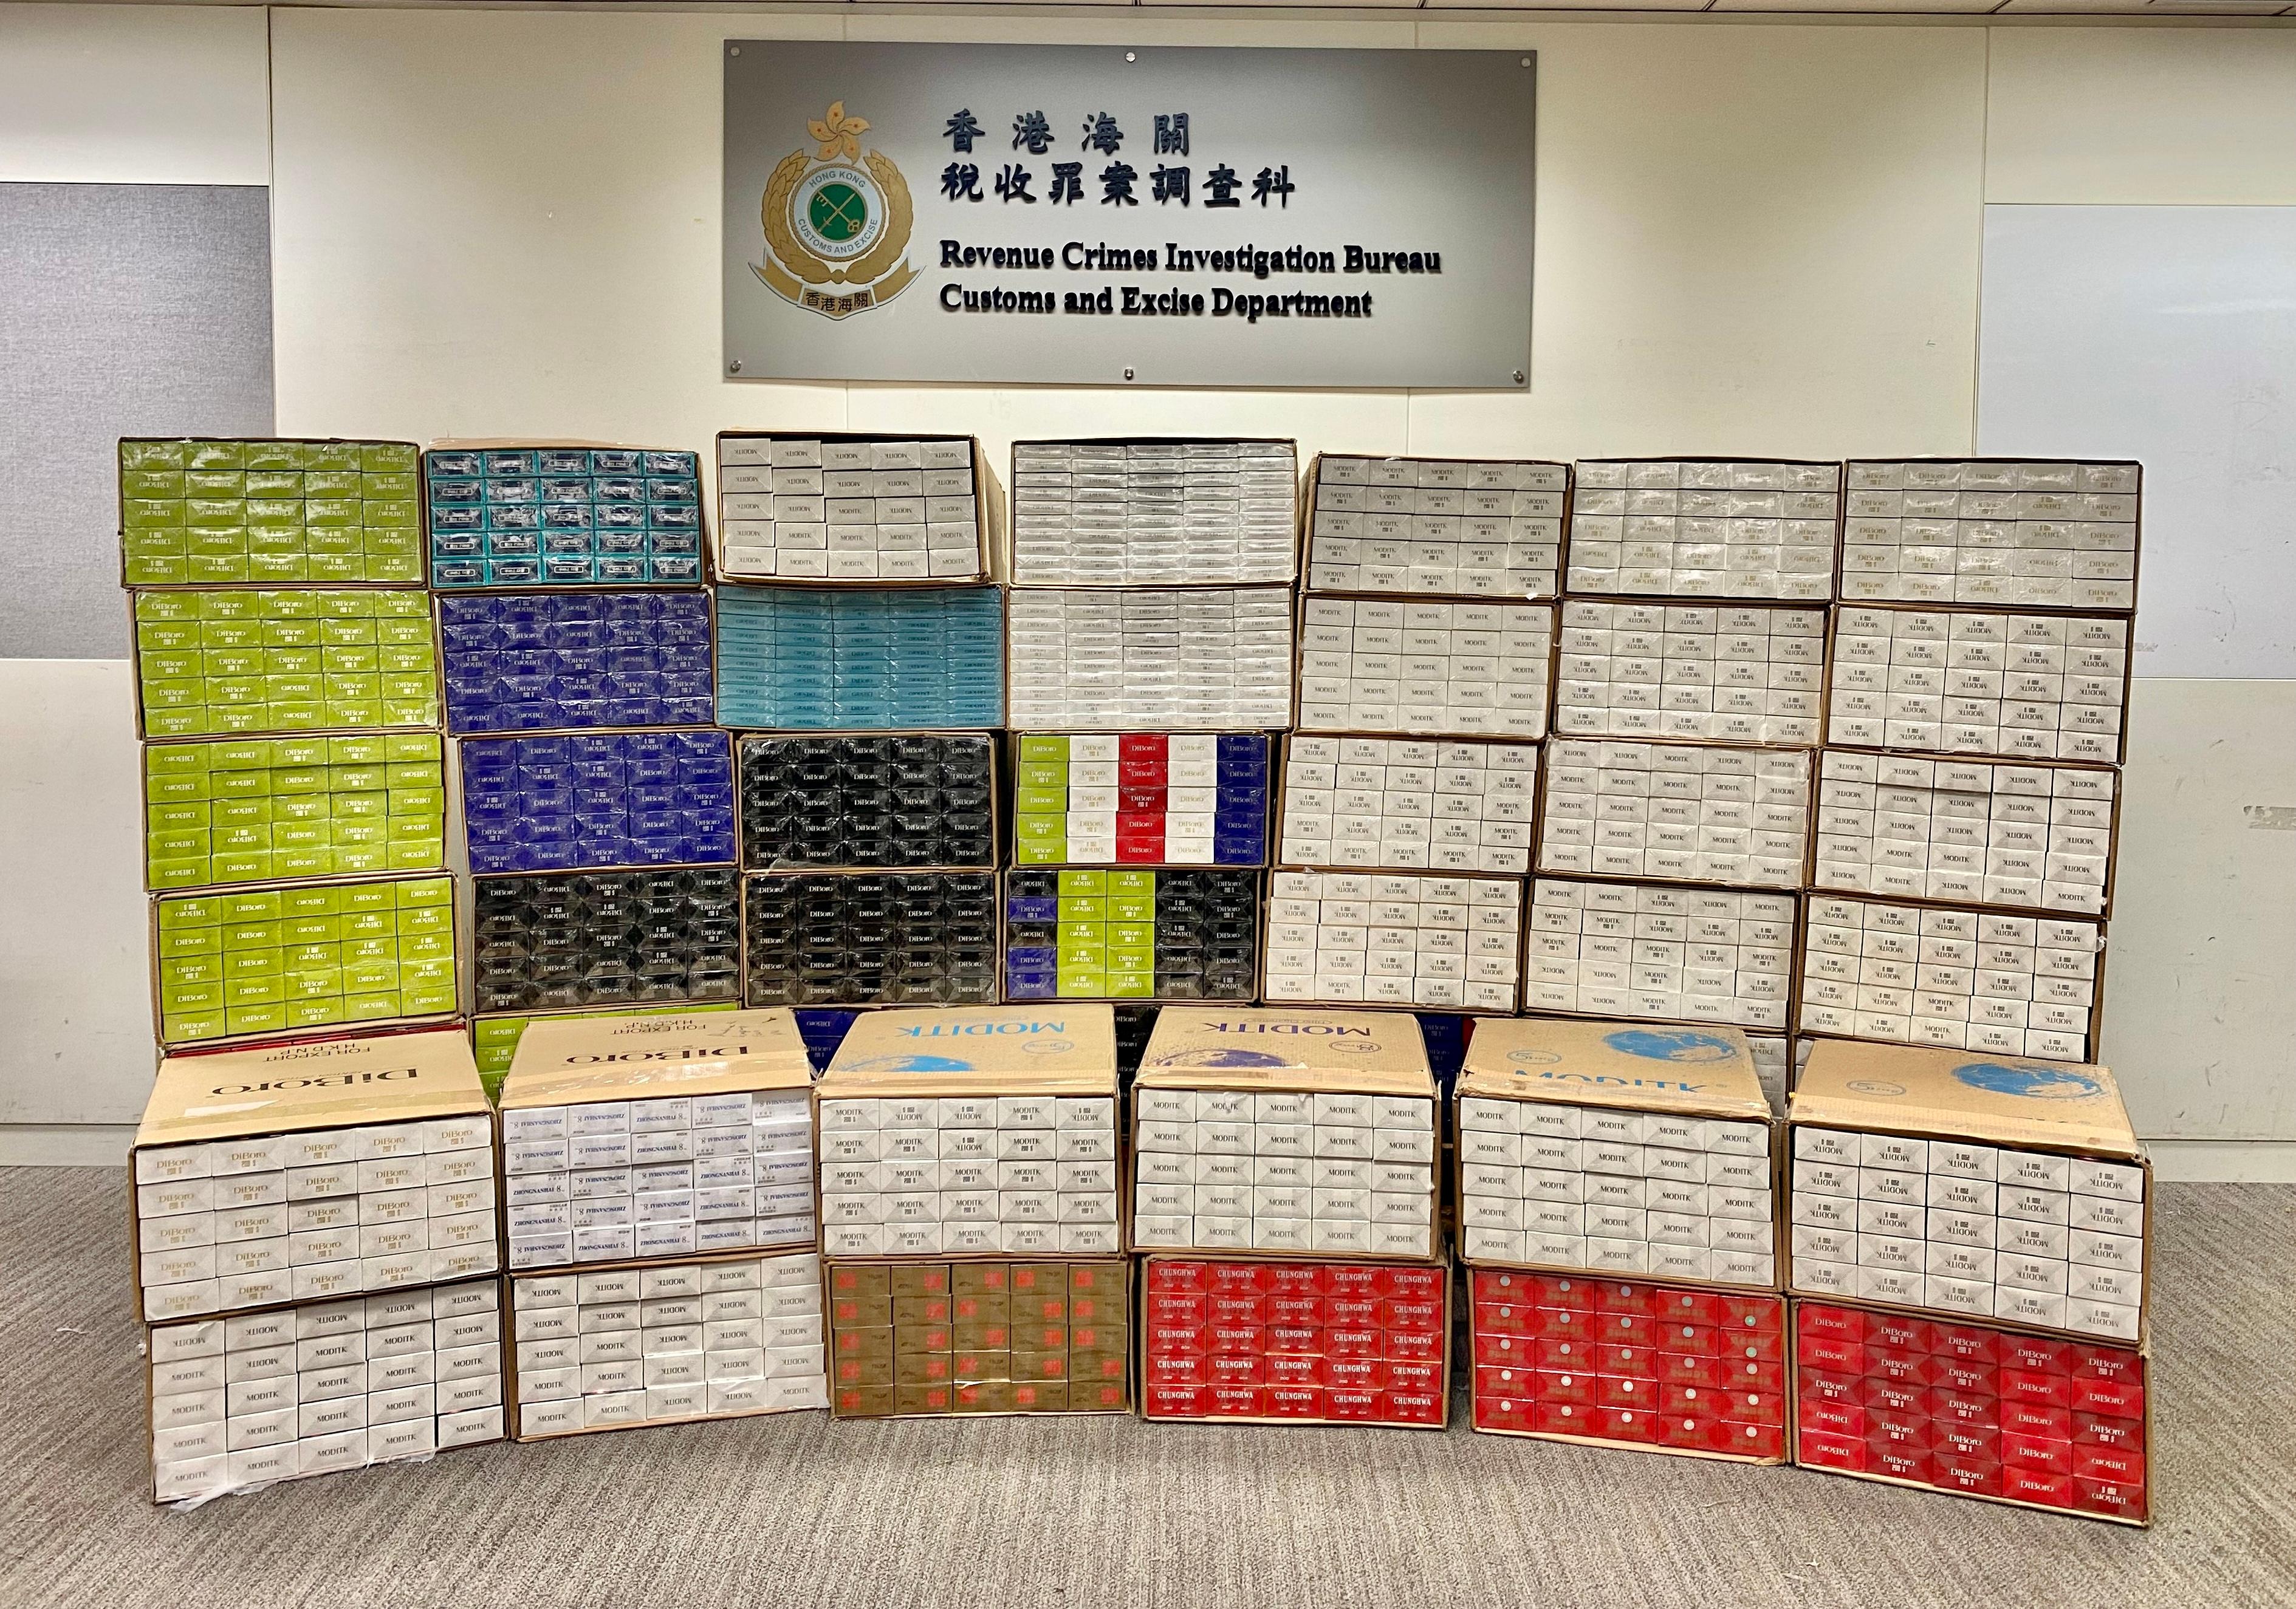 Hong Kong Customs detected two illicit cigarette cases and raided a suspected illicit cigarette storage centre while conducting anti-illicit cigarette operations in Sunny Bay and Fanling yesterday (June 8). Over 1.3 million suspected illicit cigarettes in total, with an estimated market value of about $4.9 million and a duty potential of about $3.3 million, were seized. Photo shows the suspected illicit cigarettes seized by Customs officers in Sunny Bay.